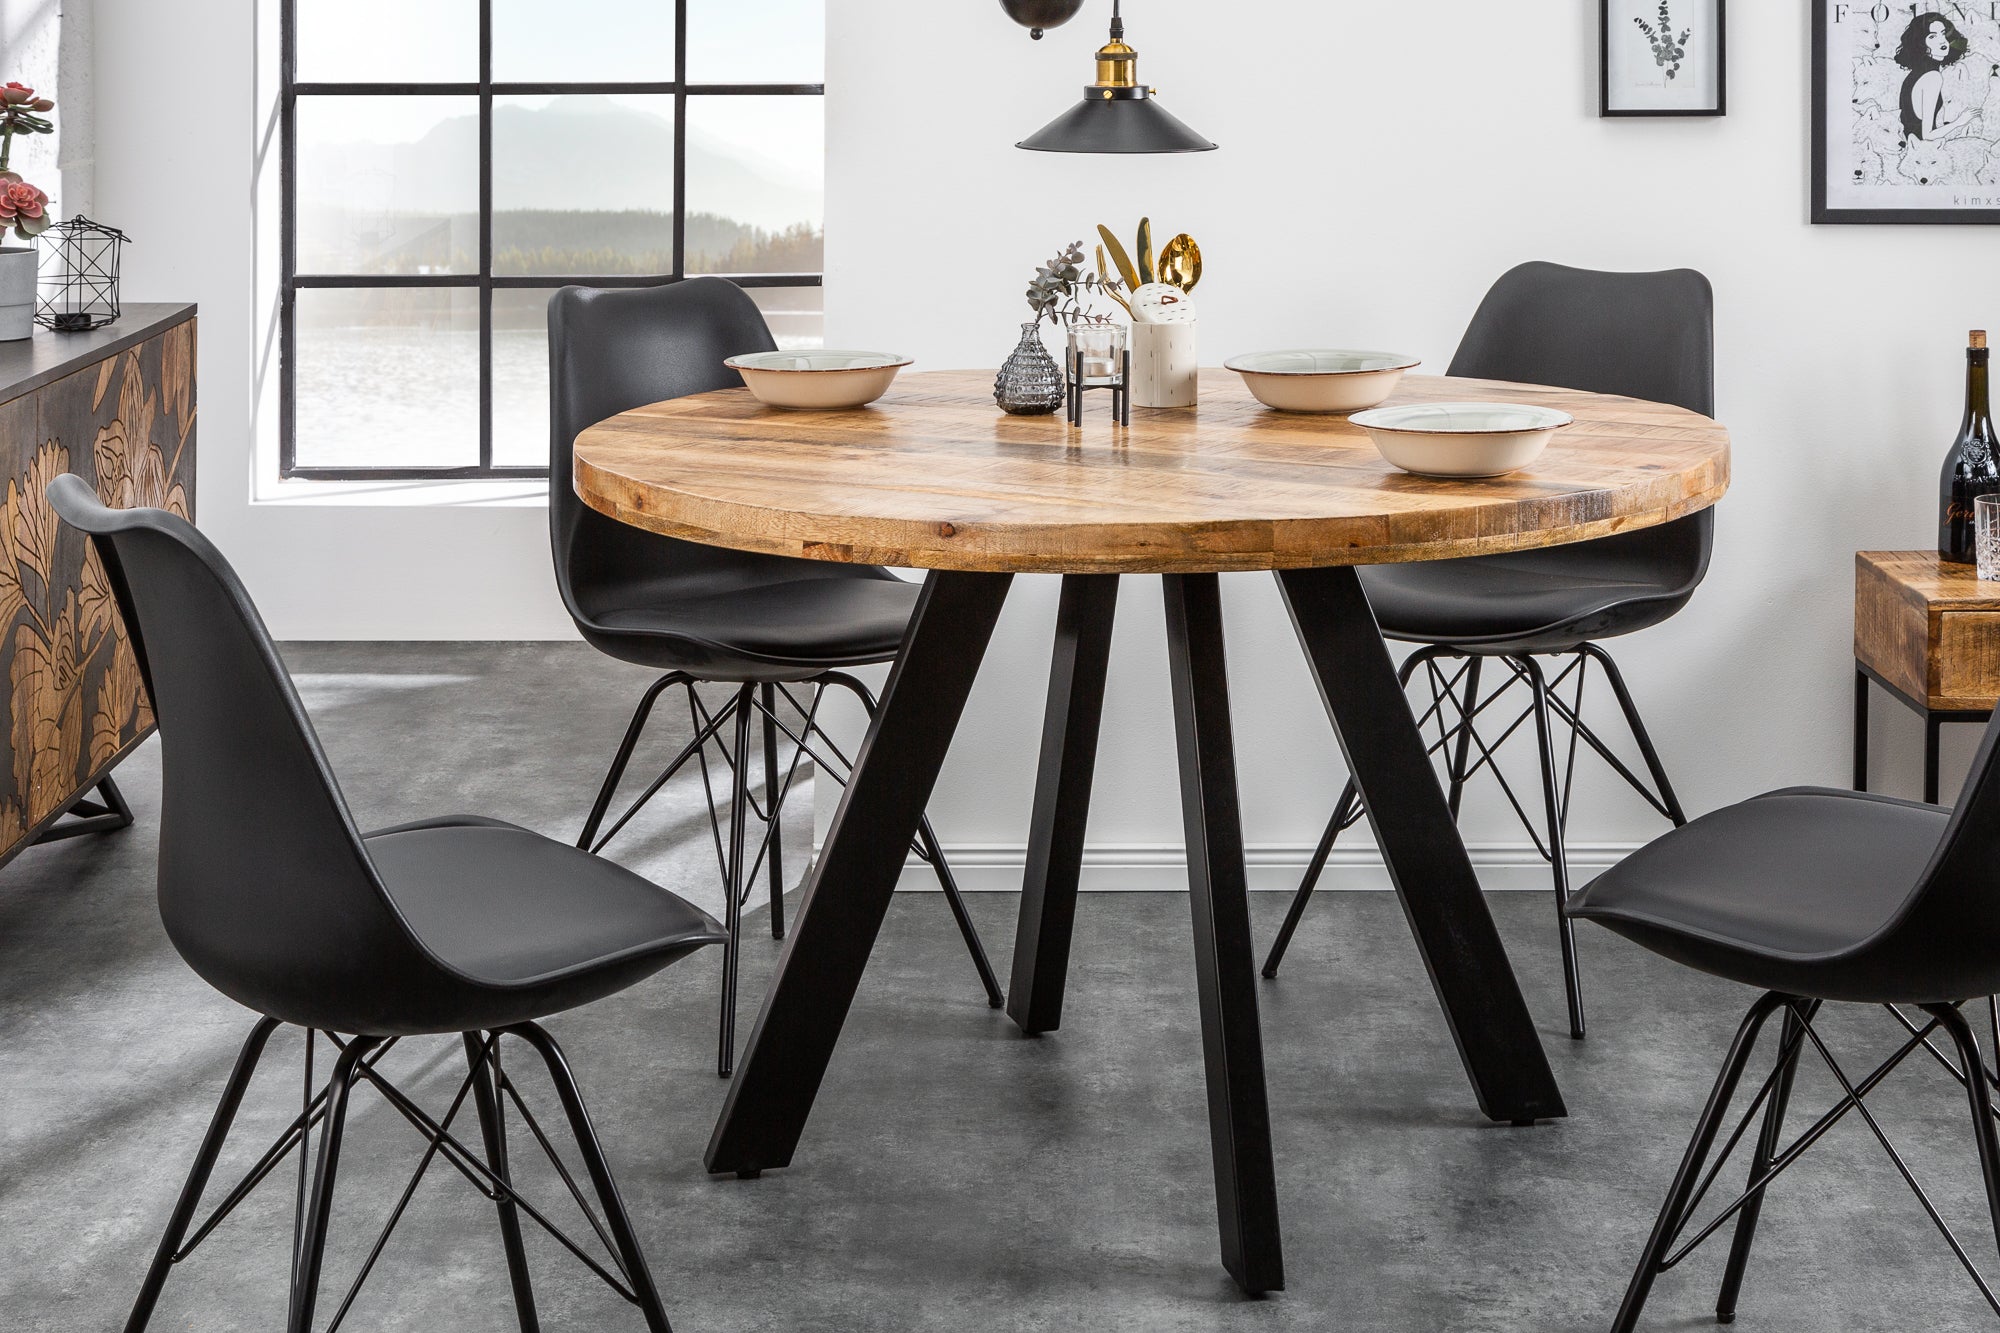 Lombardy Round Dining Table 120cm